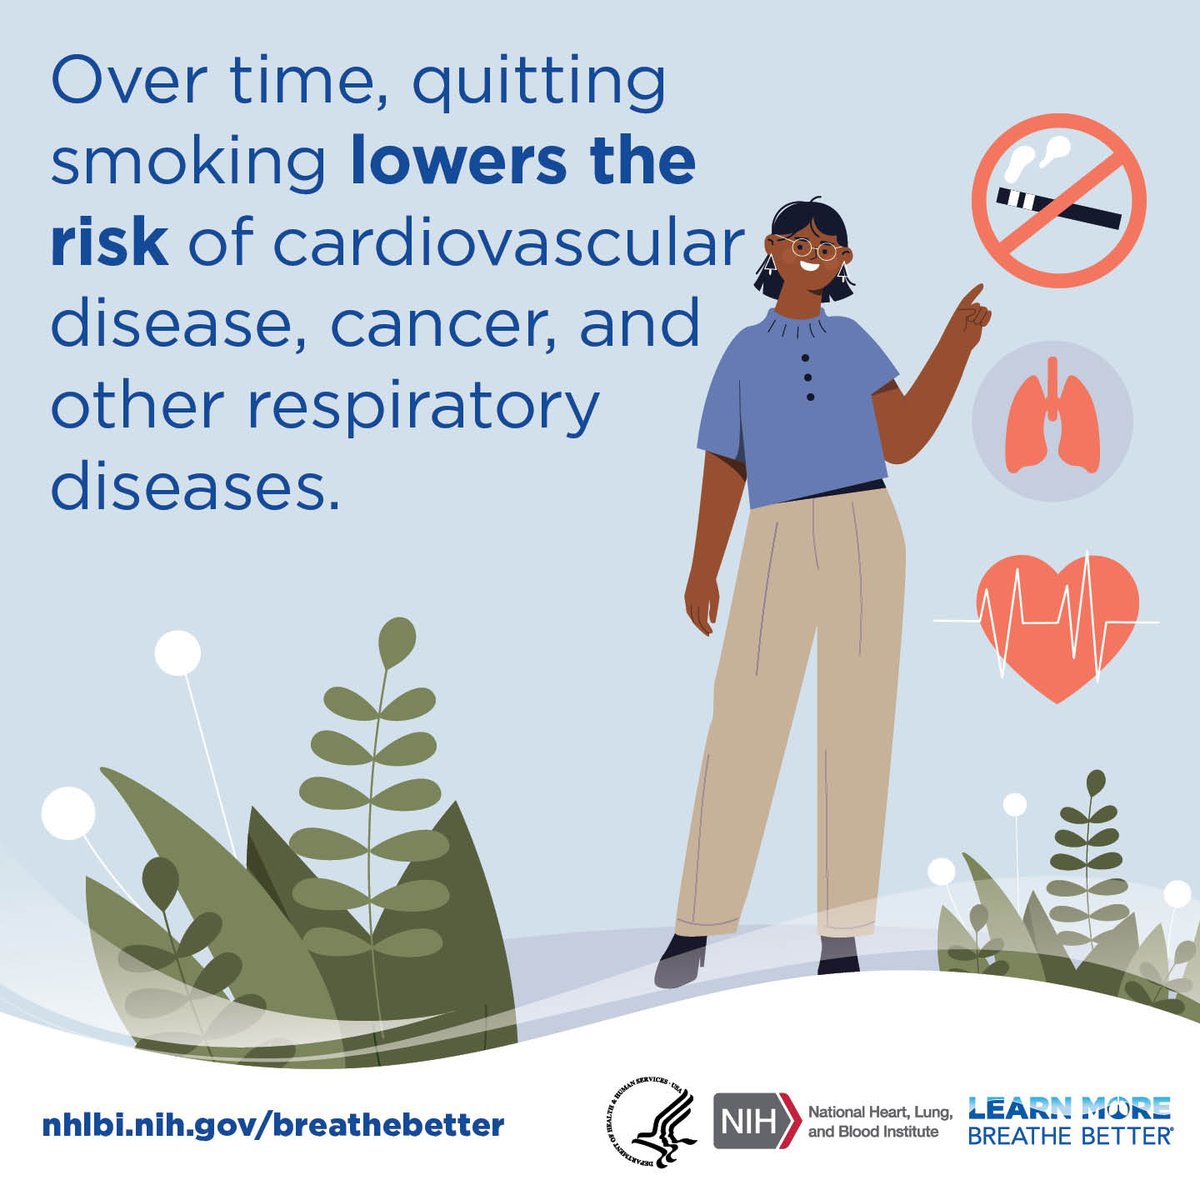 There's no time like the present to stop smoking. No matter how long you've smoked, quitting has health benefits. Make a quit plan today. Find resources to help you quit: go.nih.gov/GvKZijG #BreatheBetter